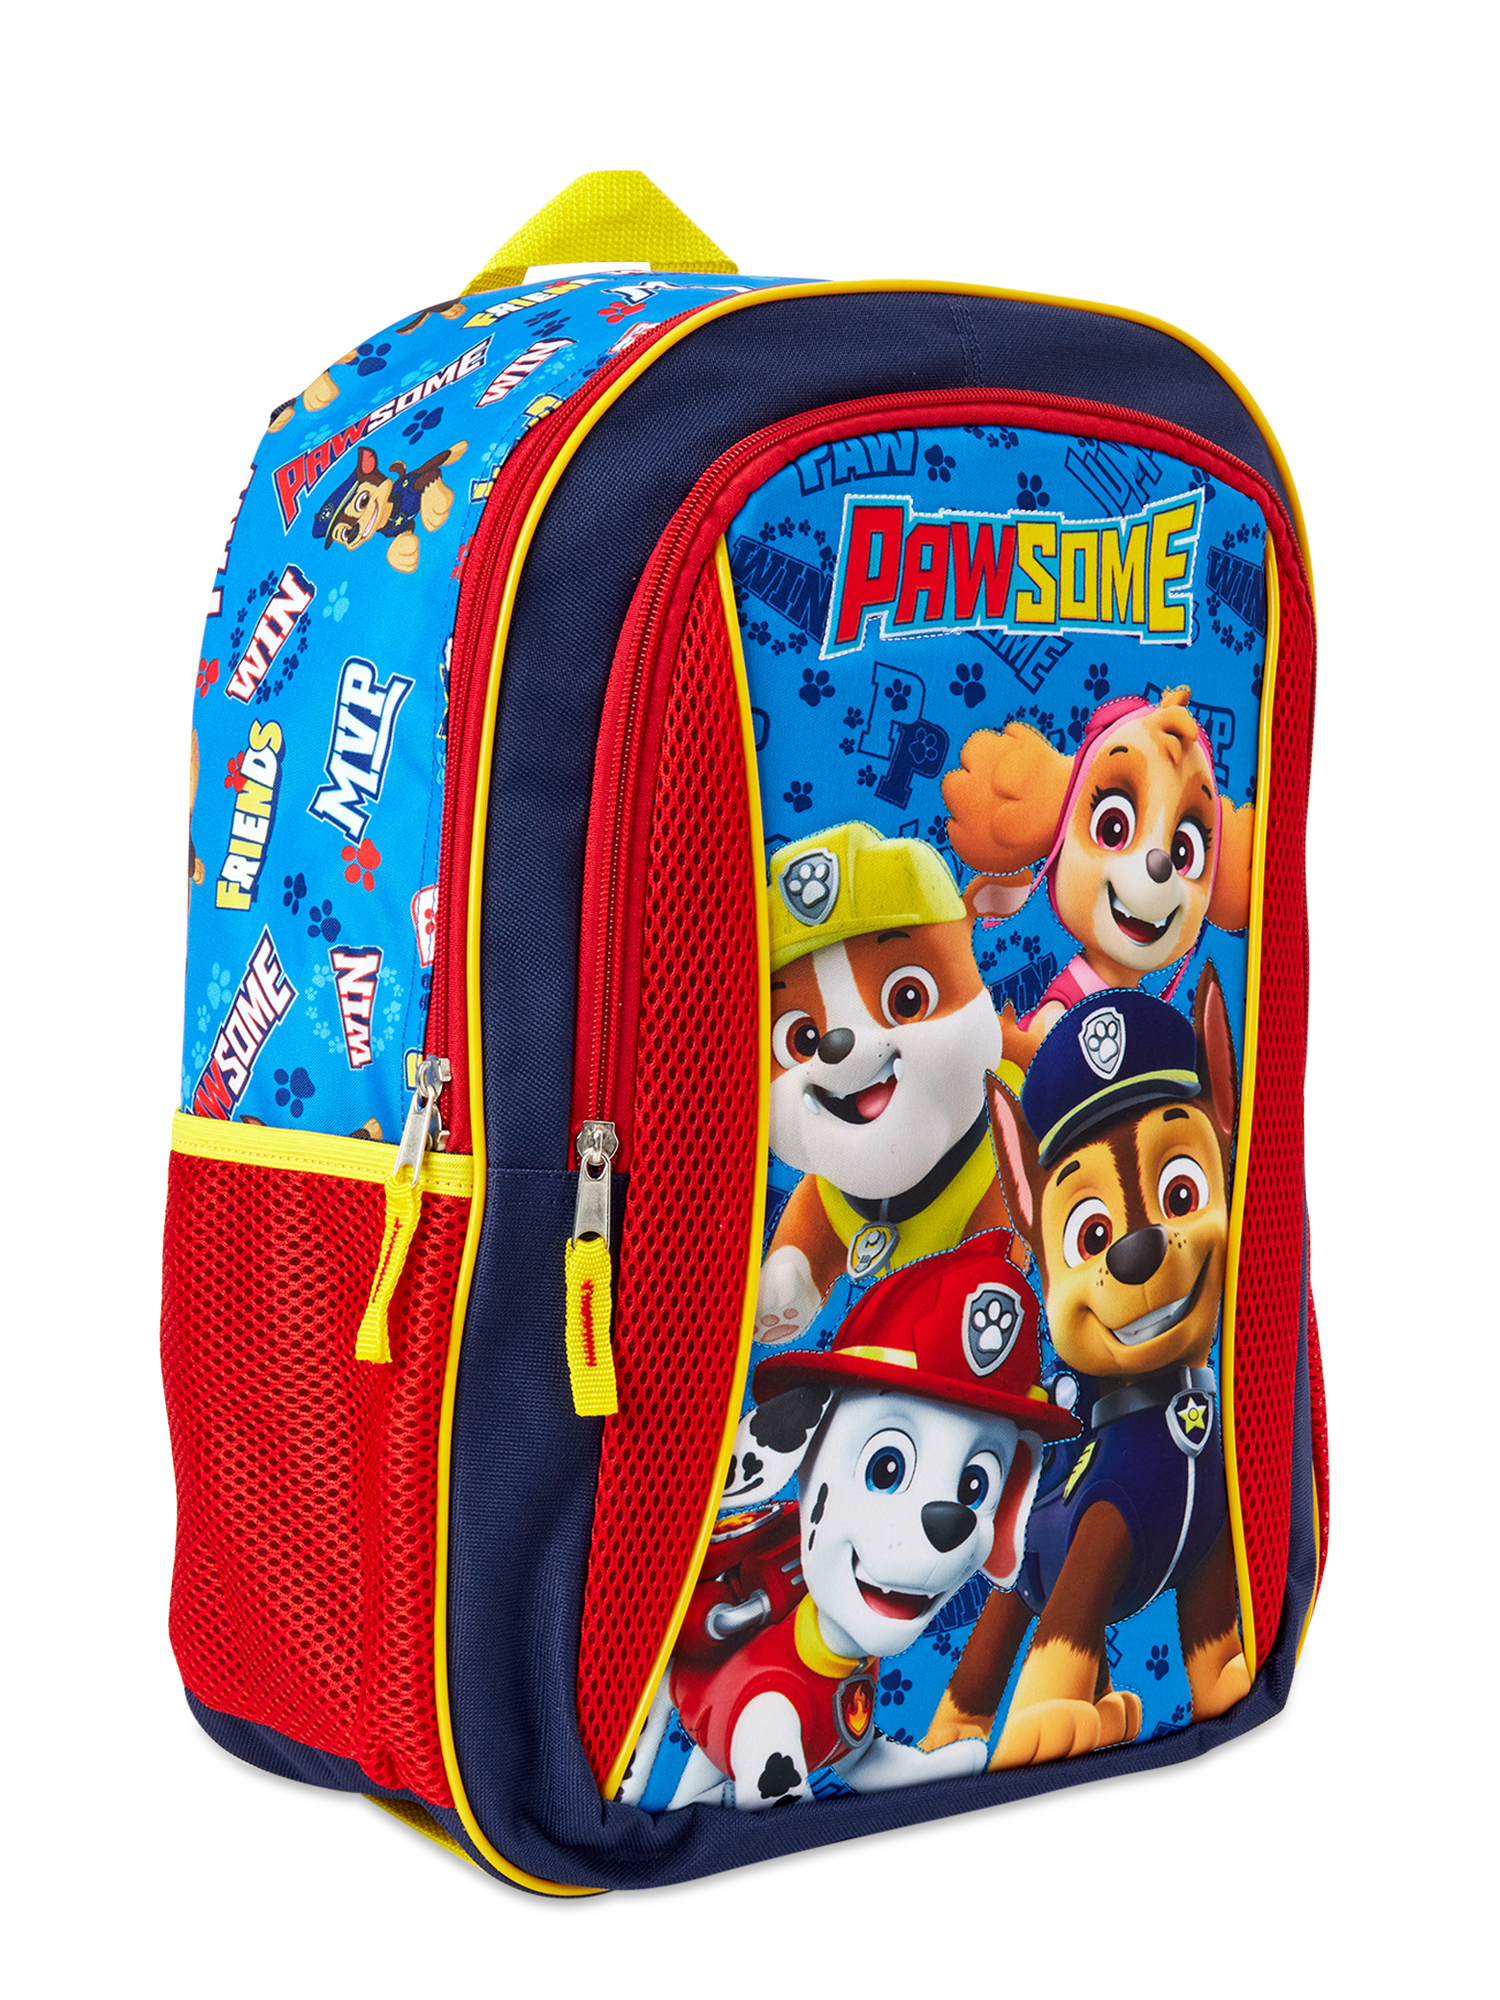 Paw Patrol Pawsome Backpack - image 4 of 6